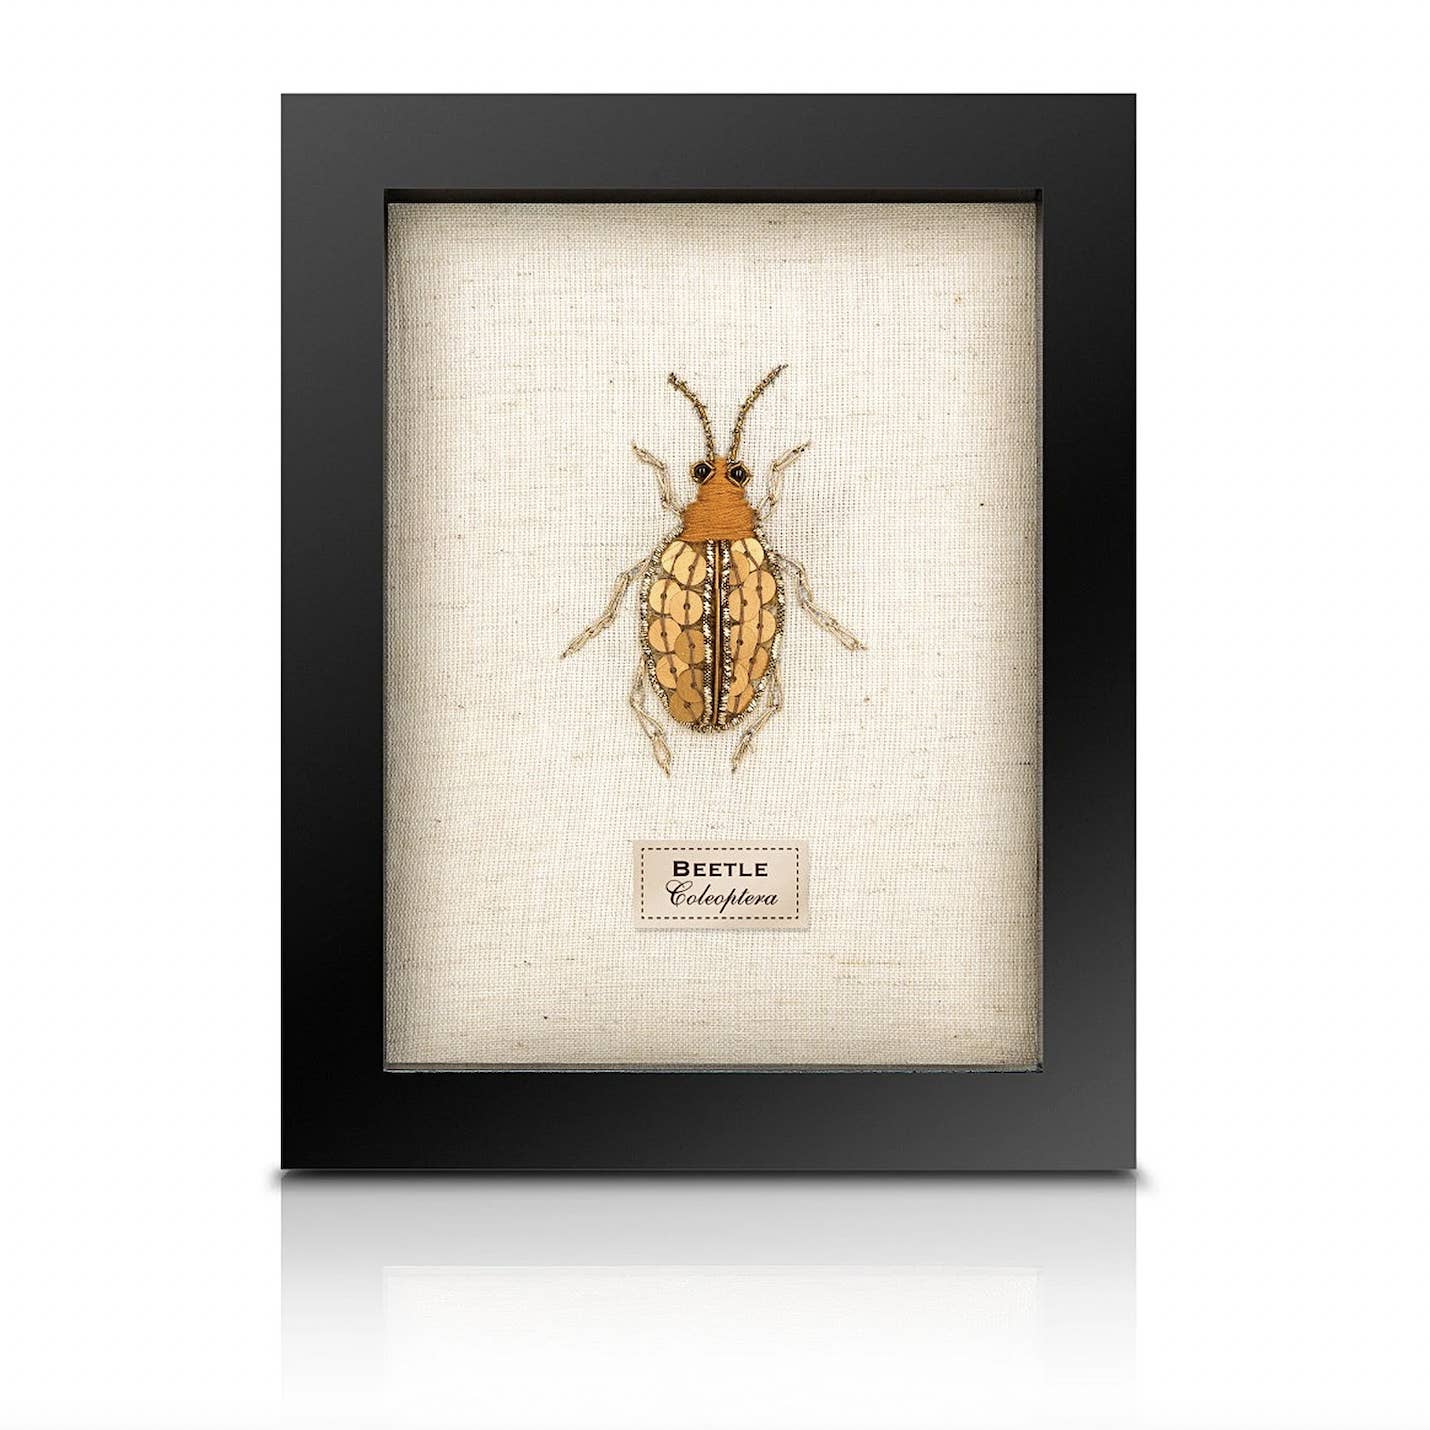 Hand Embroidered Beaded Spotted Beetle Frame